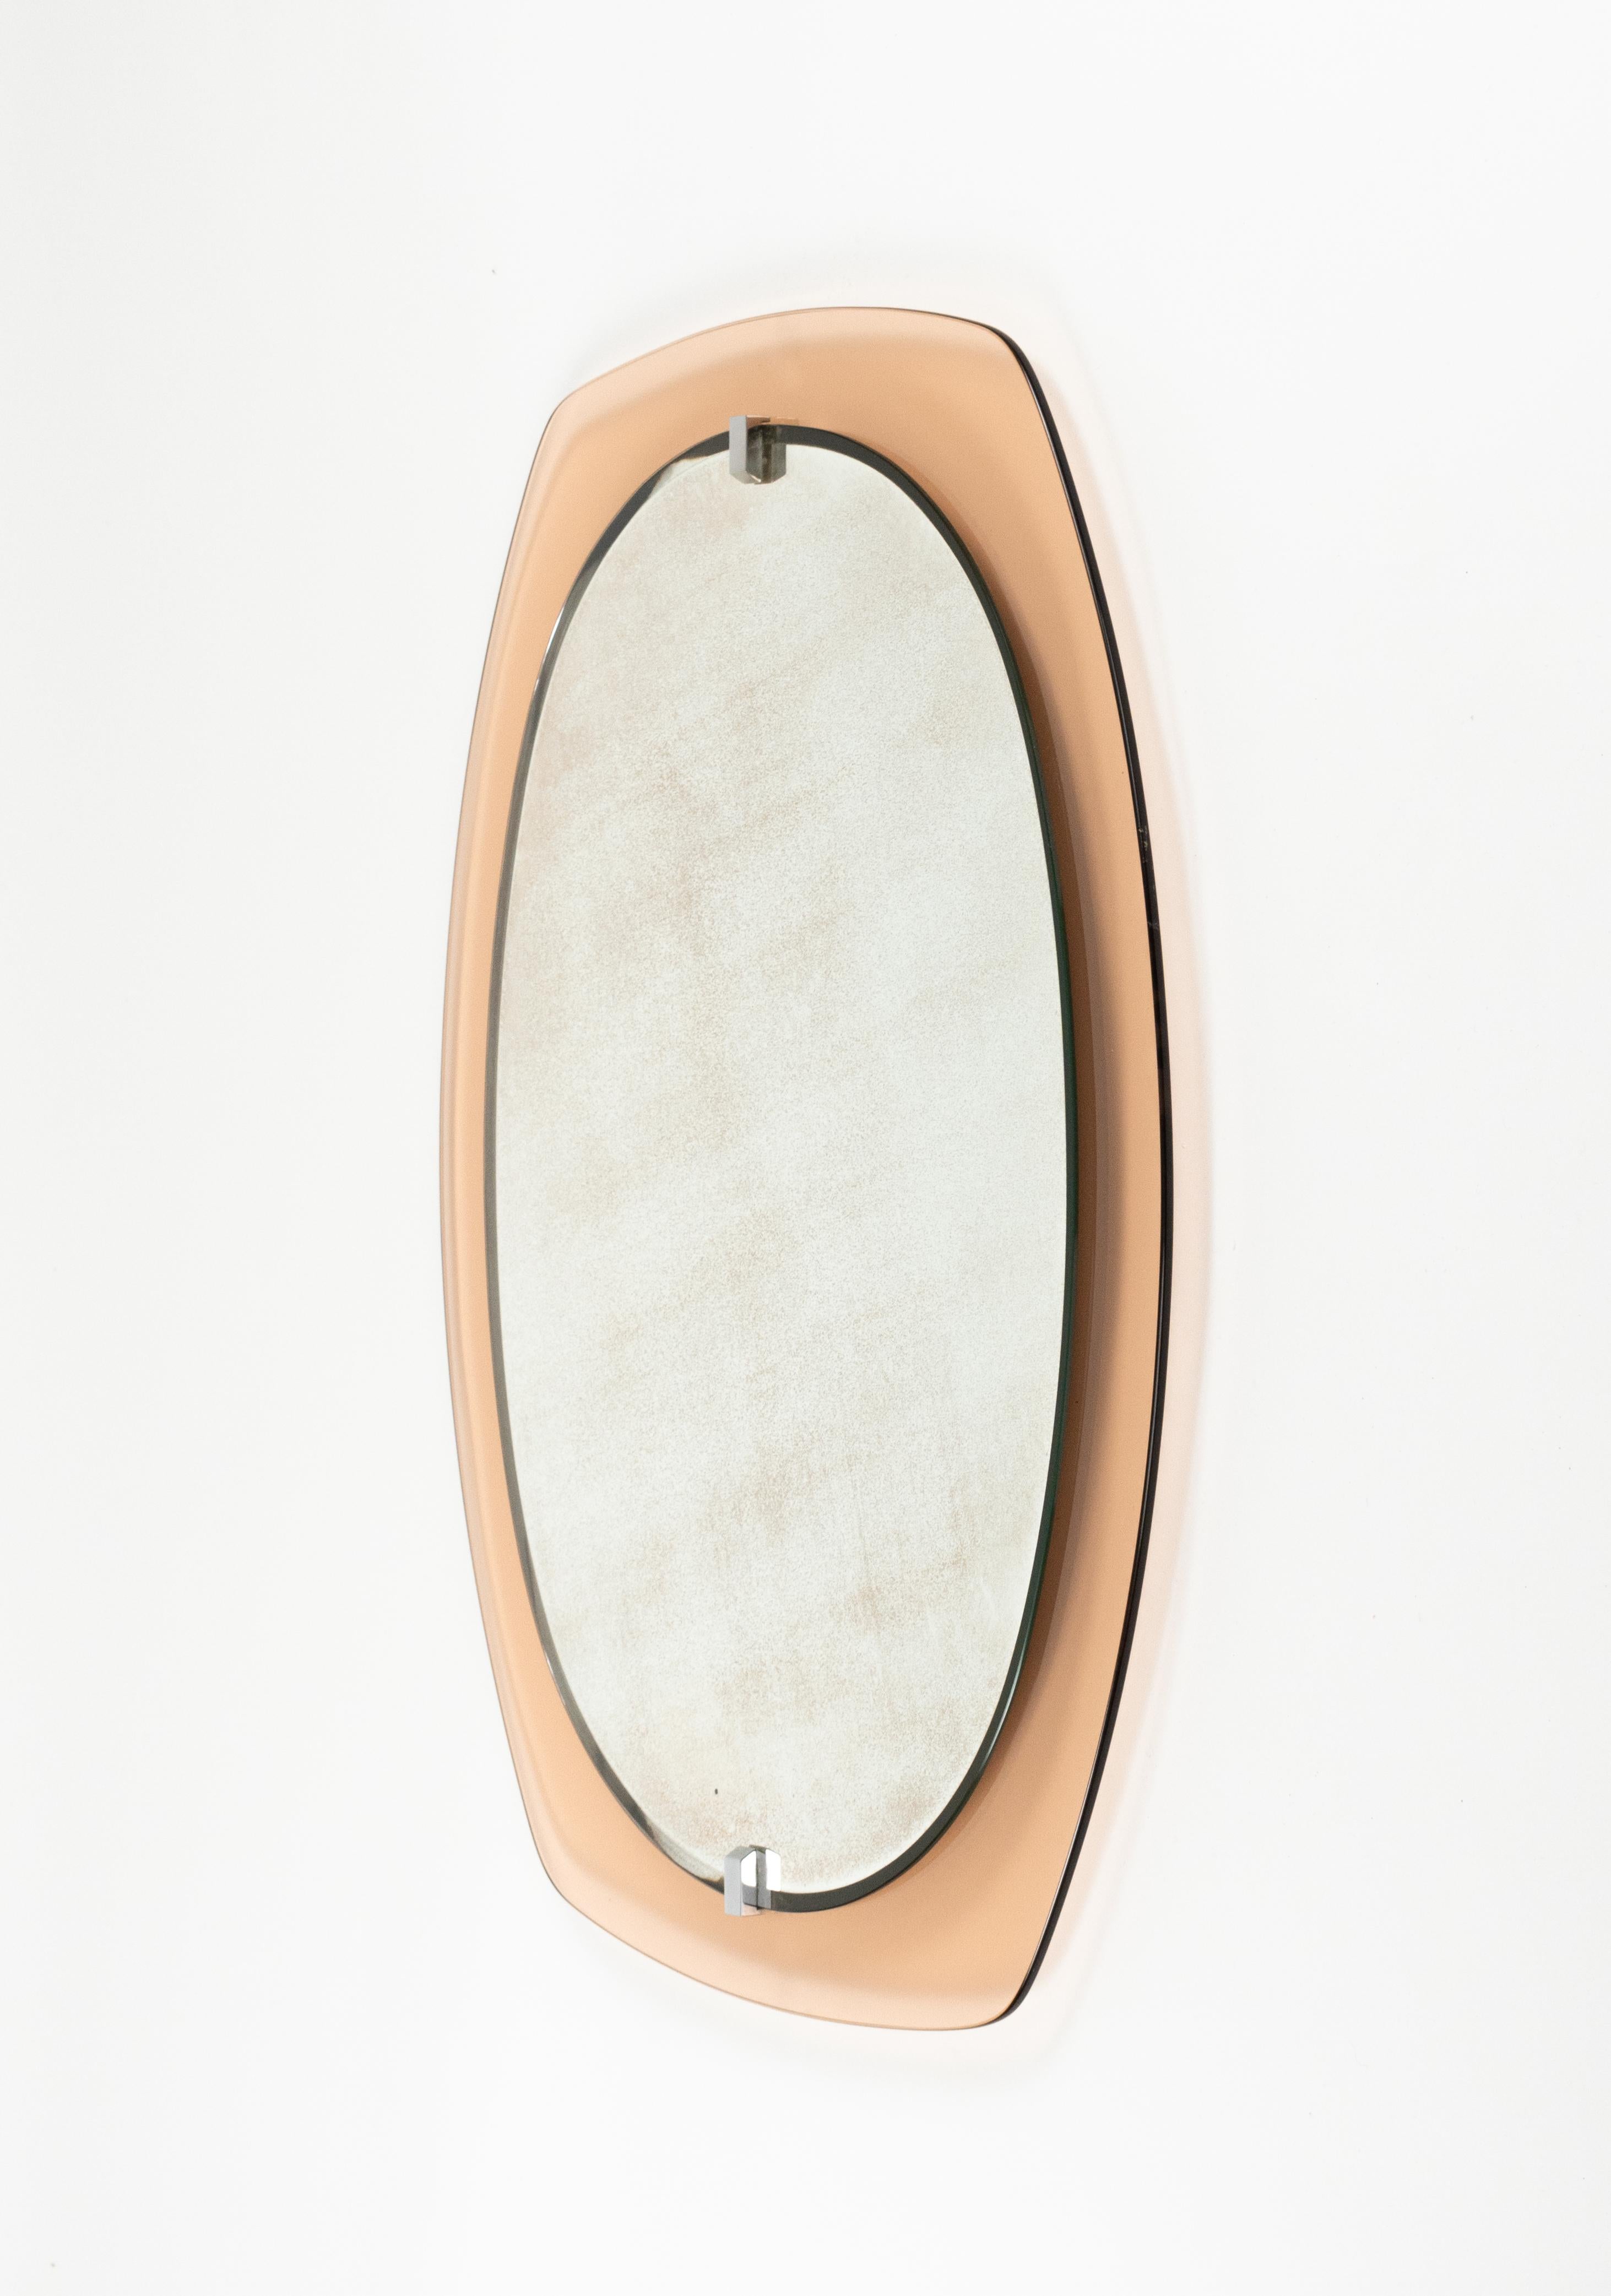 Midcentury Glass Pink Oval Wall Mirror by Veca, Italy 1970s For Sale 4